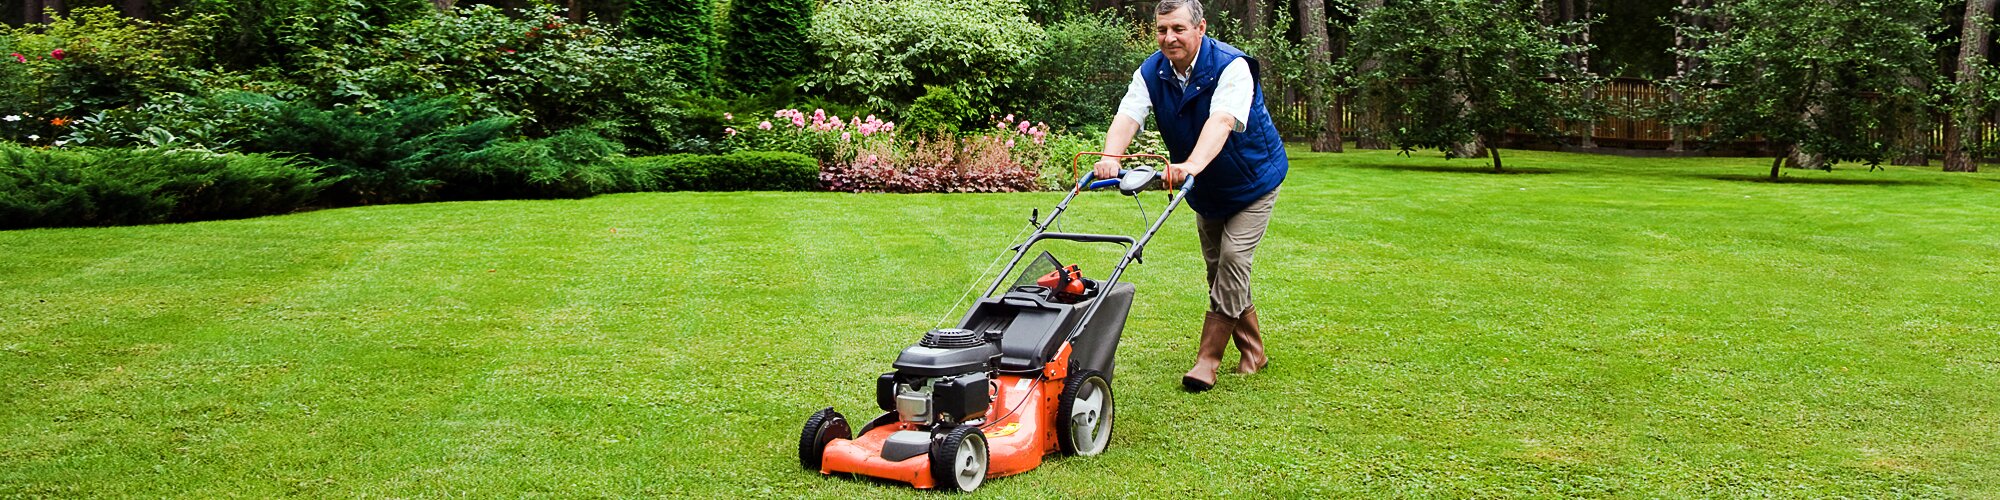 A person mowing lawn